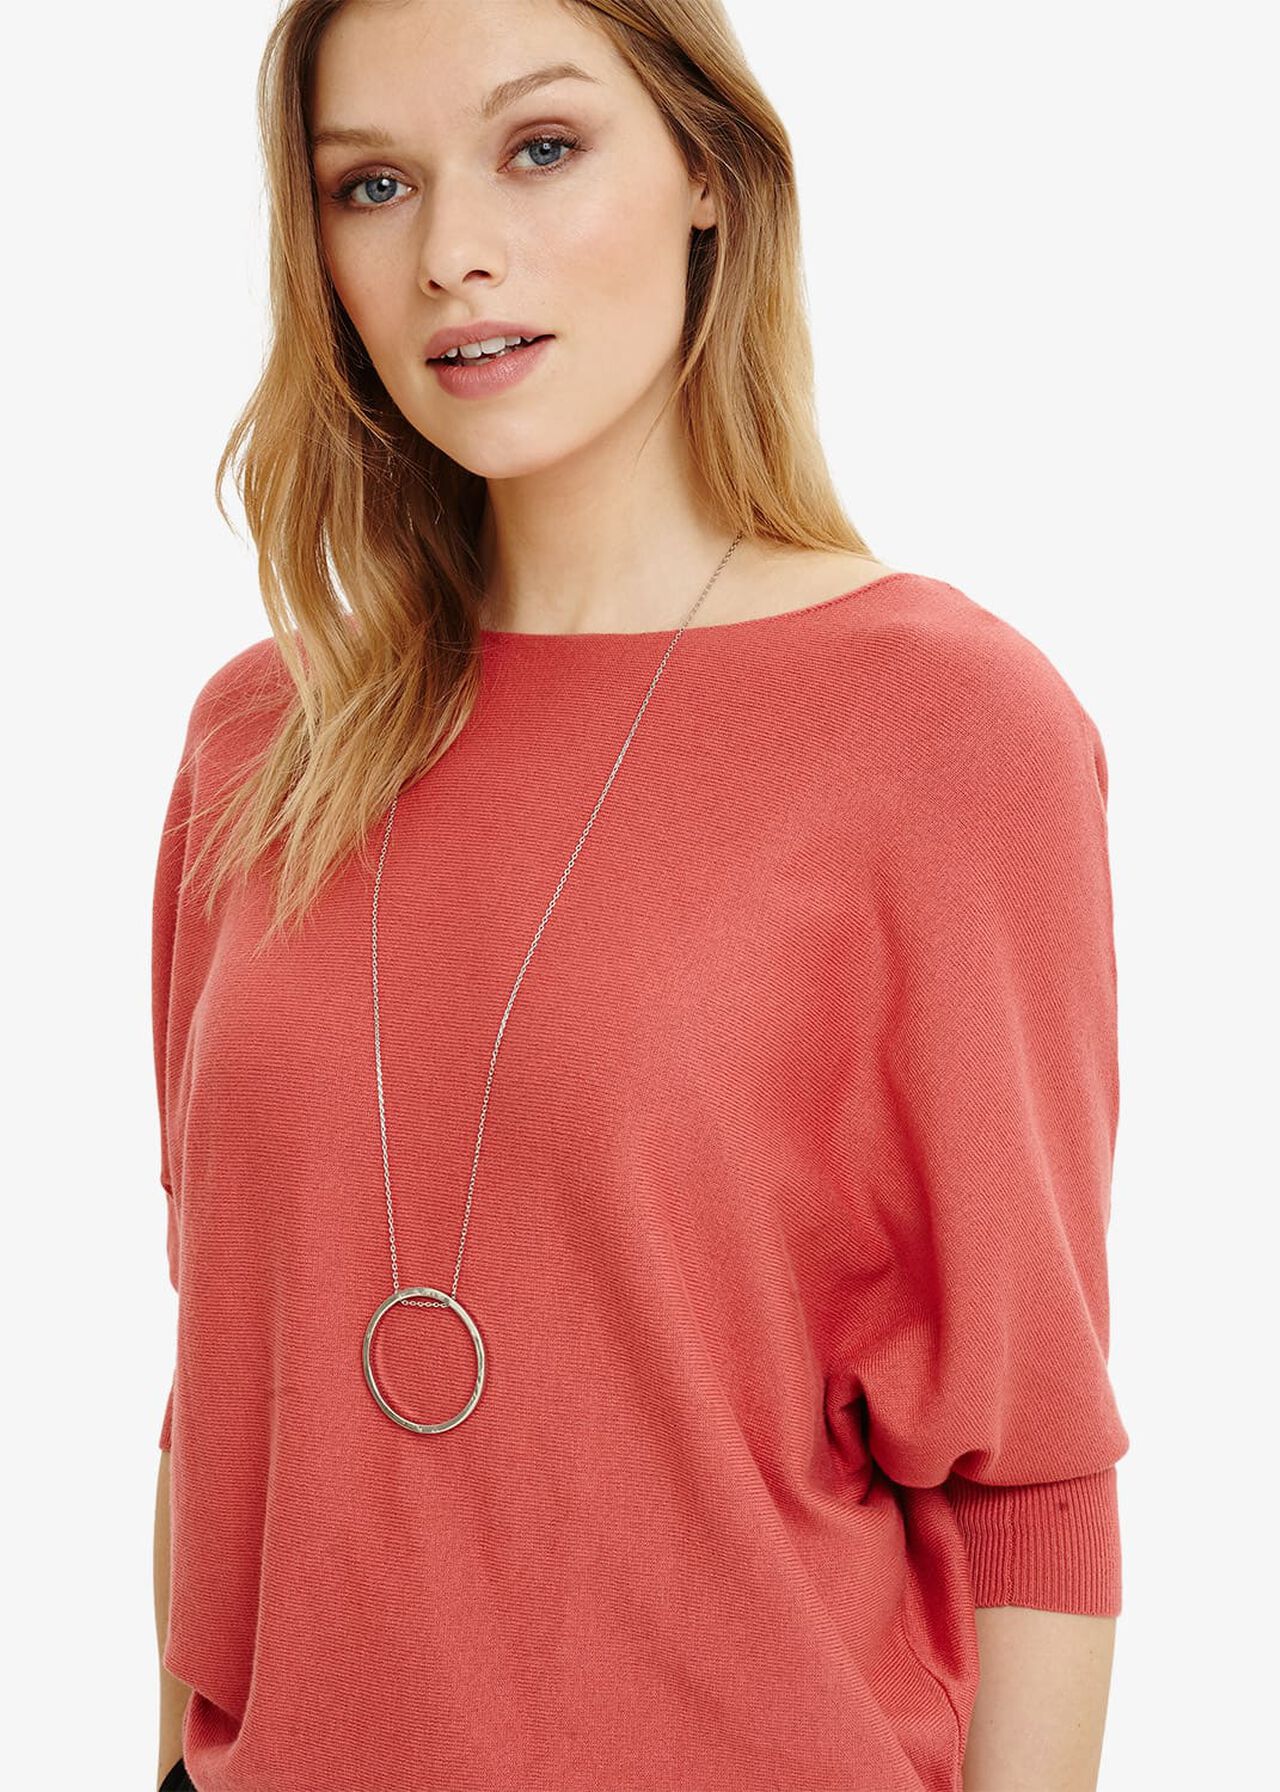 Marge Simple Link Long Pendant Necklace